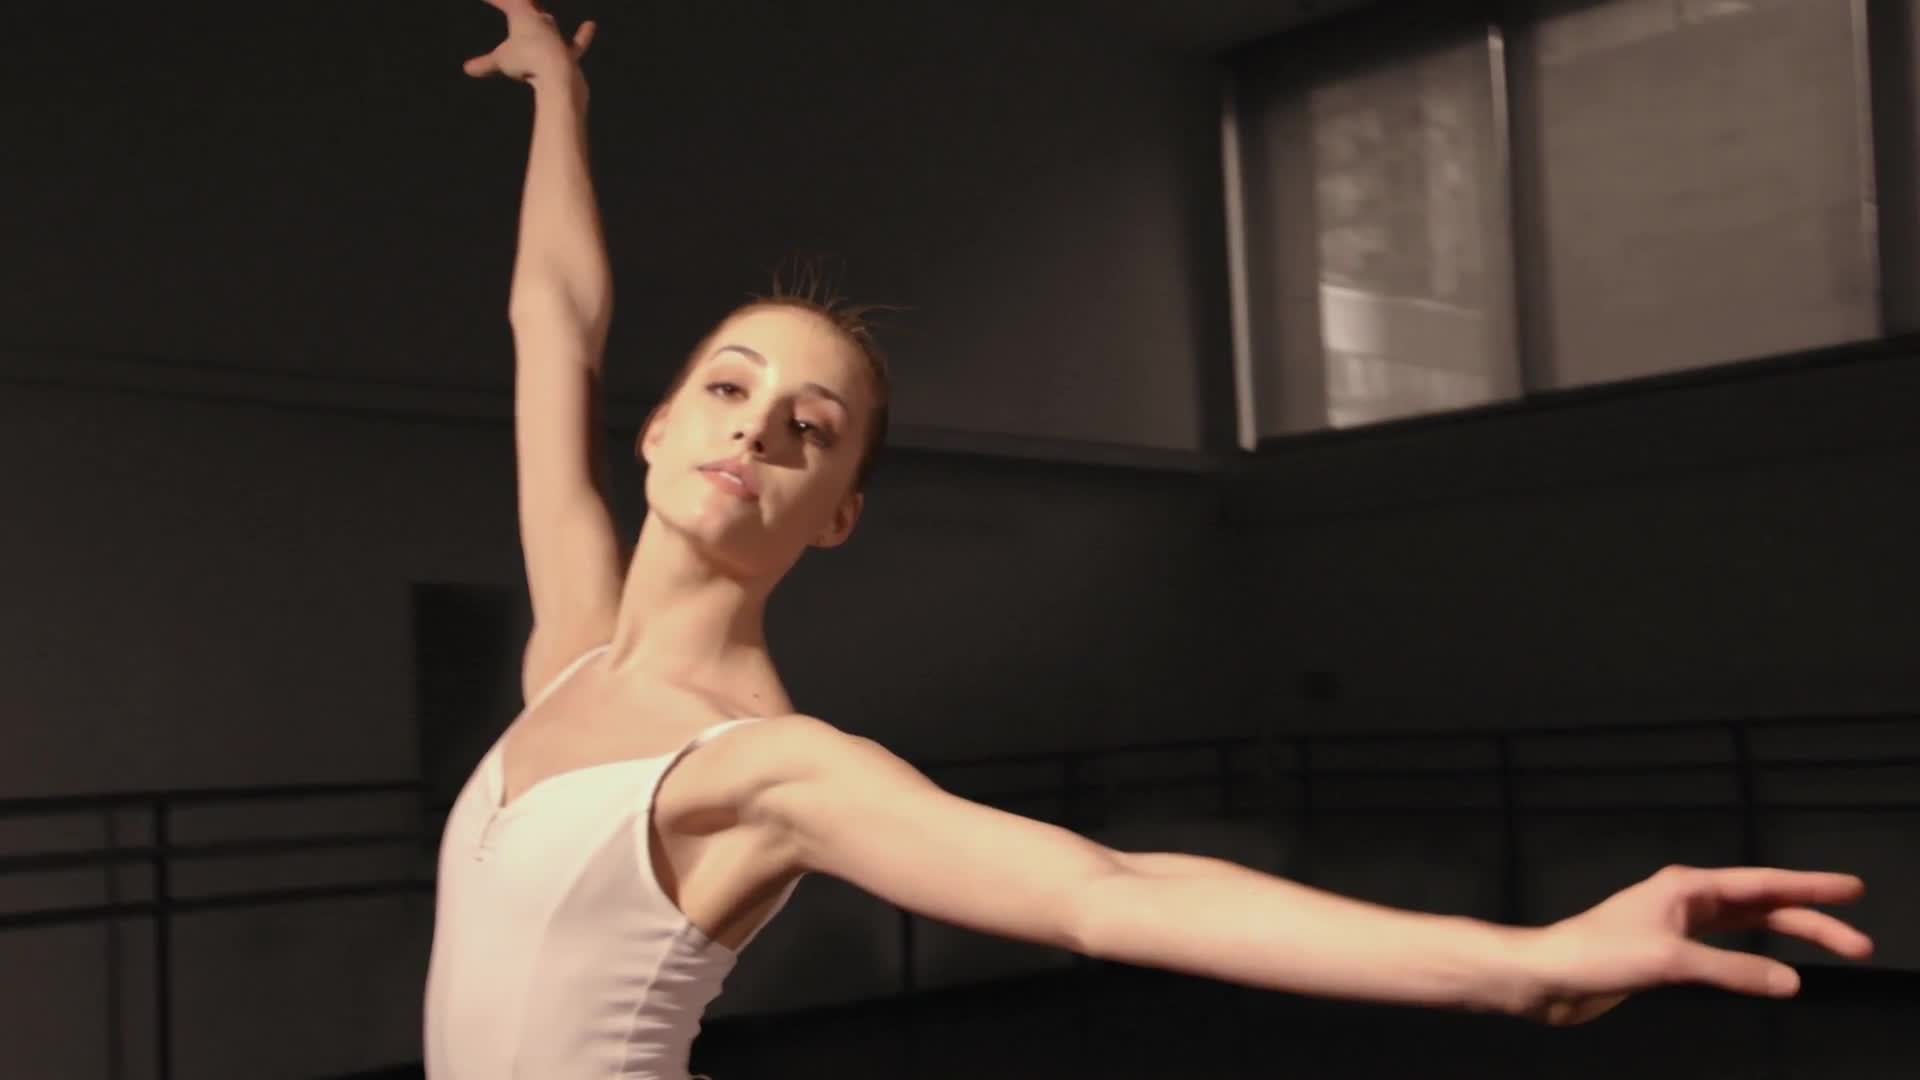 Watch Strictly Ballet | Life as a Professional Ballerina | Teen Vogue